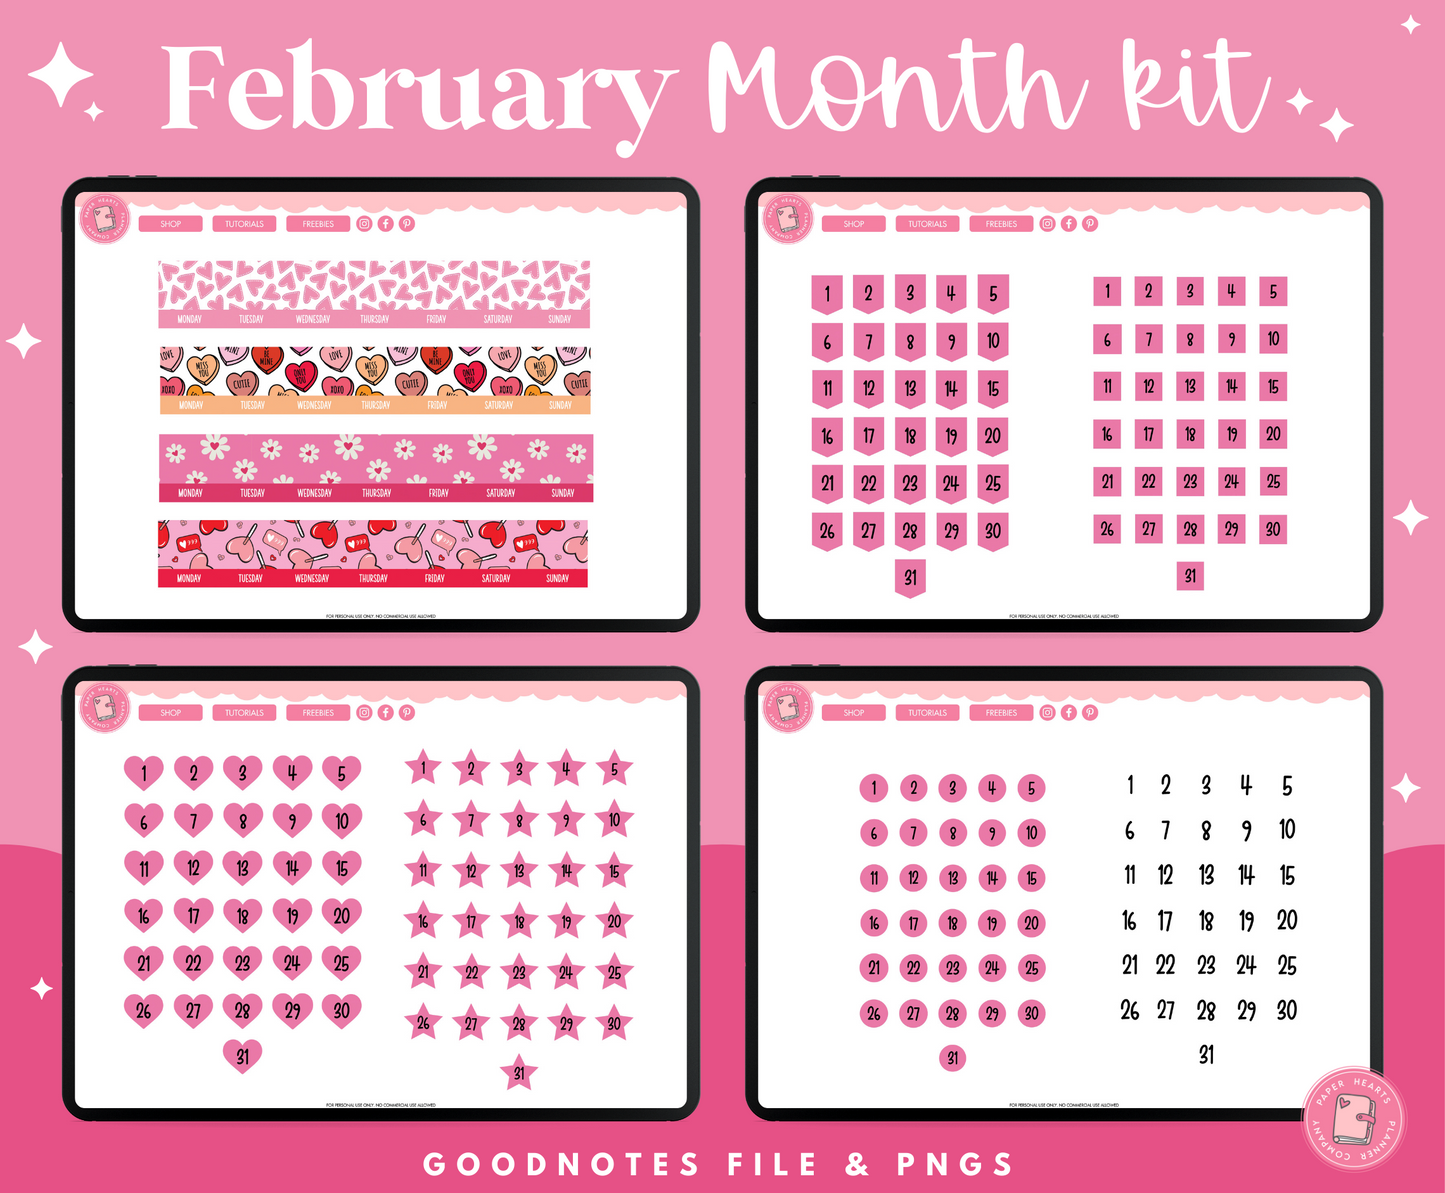 February Monthly Kit Stickers